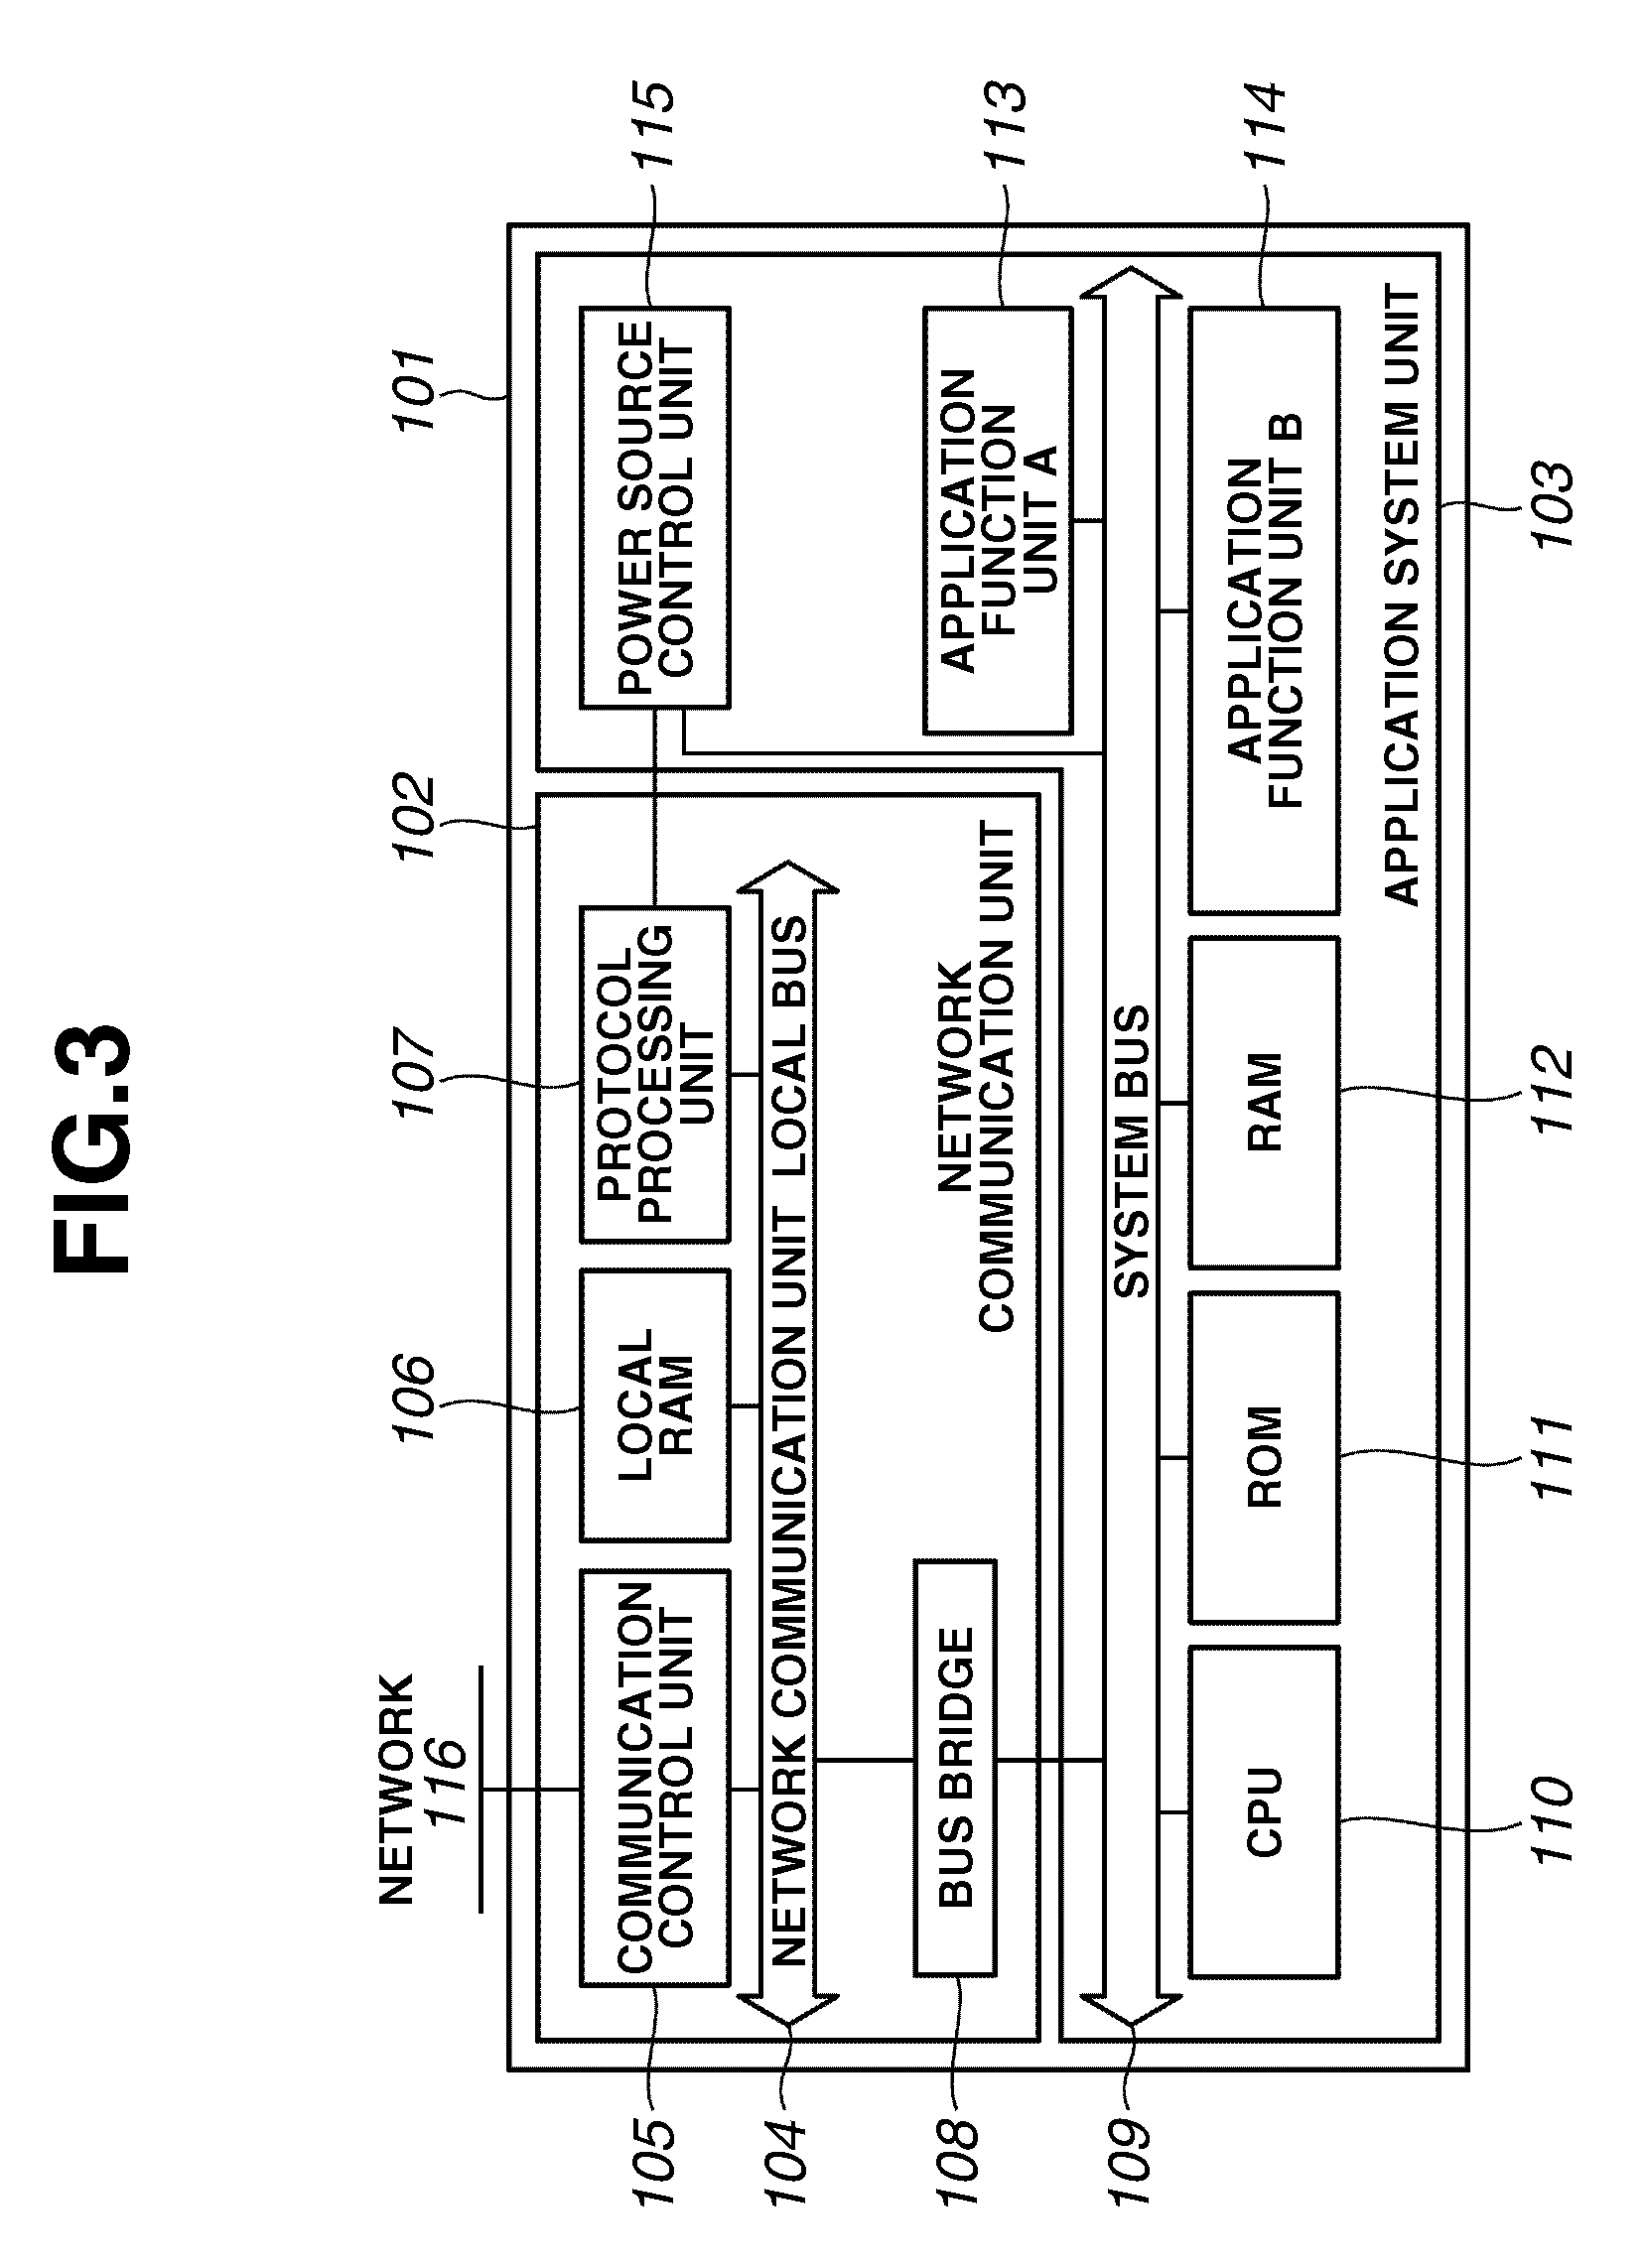 Information processing apparatus having a low power consumption state and releasing the low power consumption state to perform communication, and power control method therefor